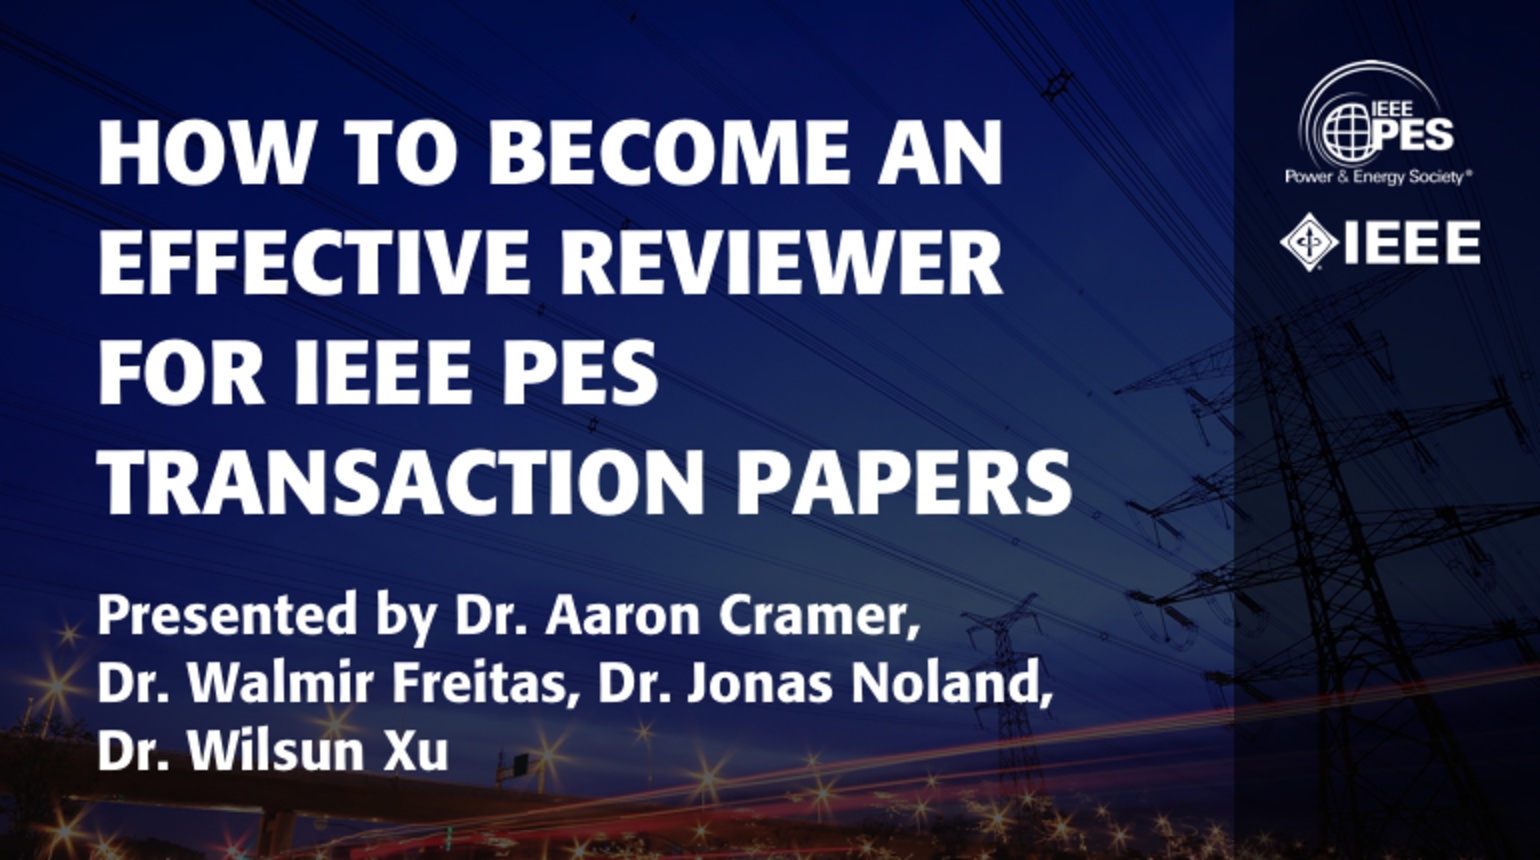 How to Become an Effective Reviewer for IEEE PES Transaction Papers